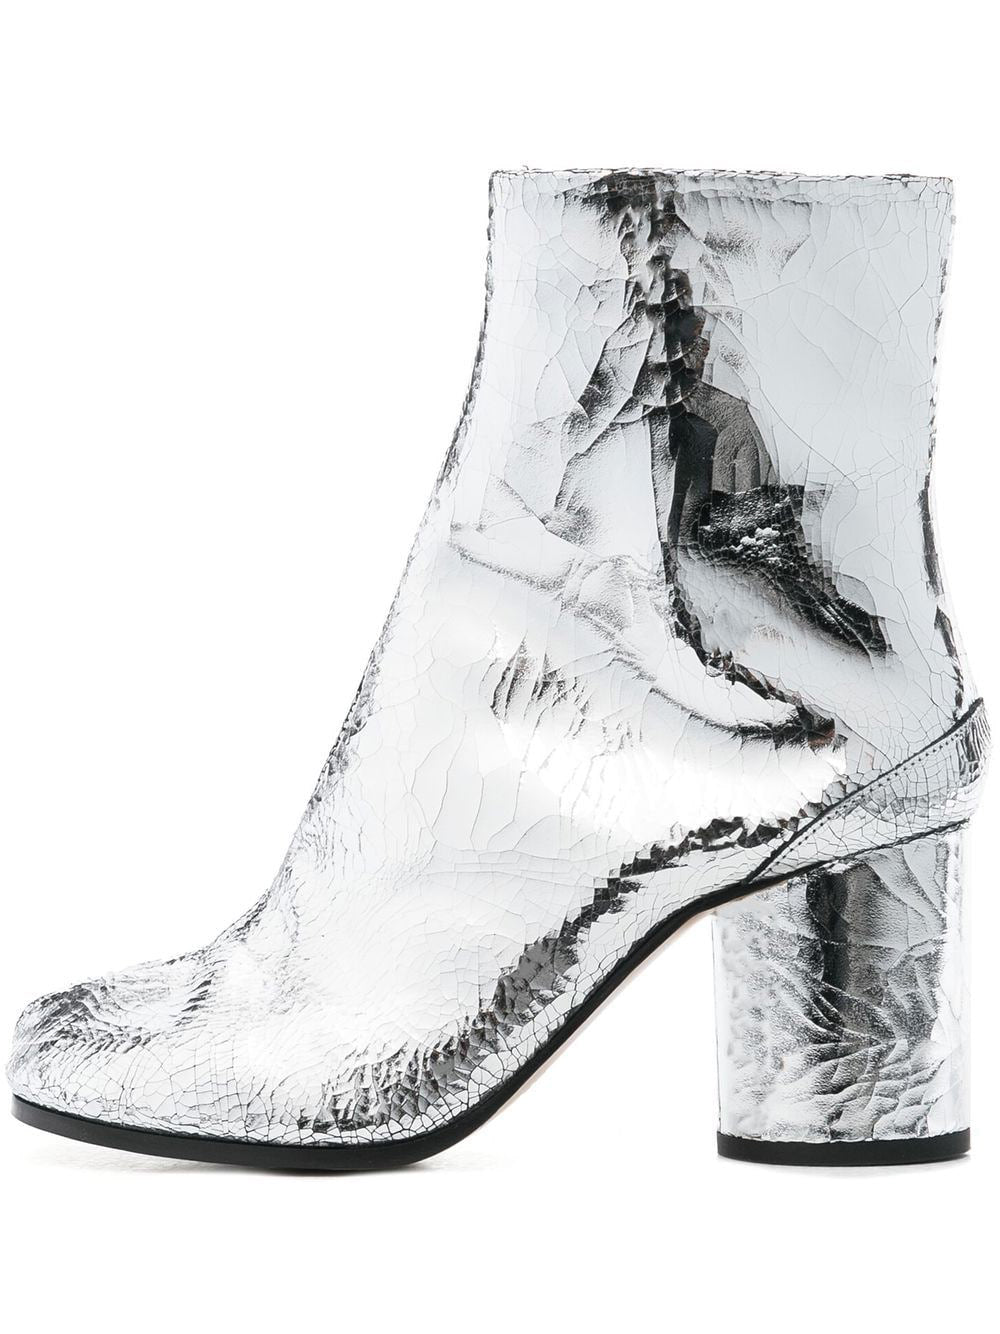 MAISON MARGIELA-SILVER LEATHER TABI ANKLE BOOT-S58WU0260P5016 T9002